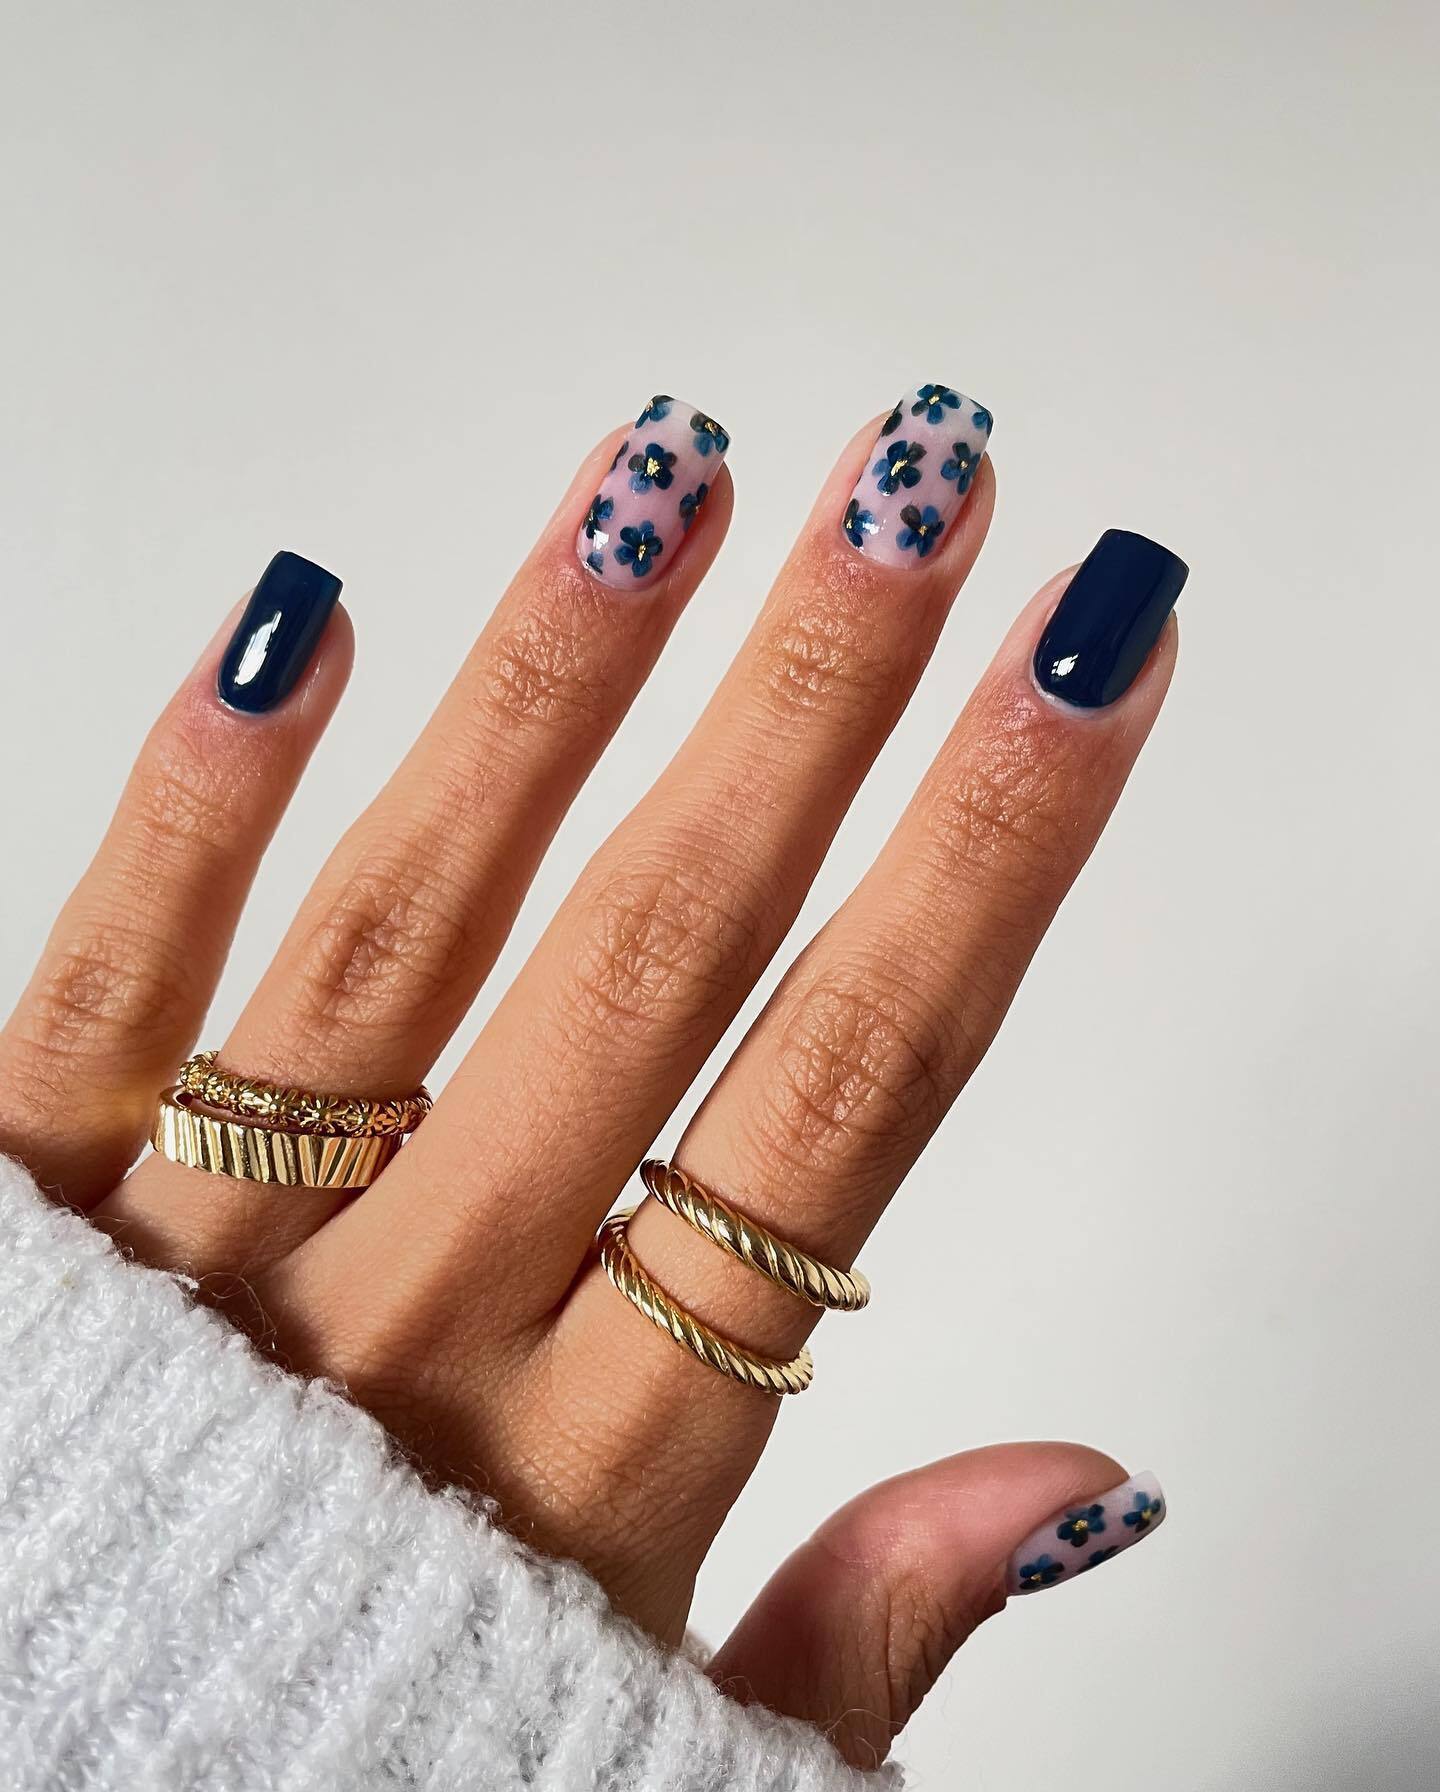 Berry nails: 10 ideas for the most ''delicious'' manicure this spring and summer